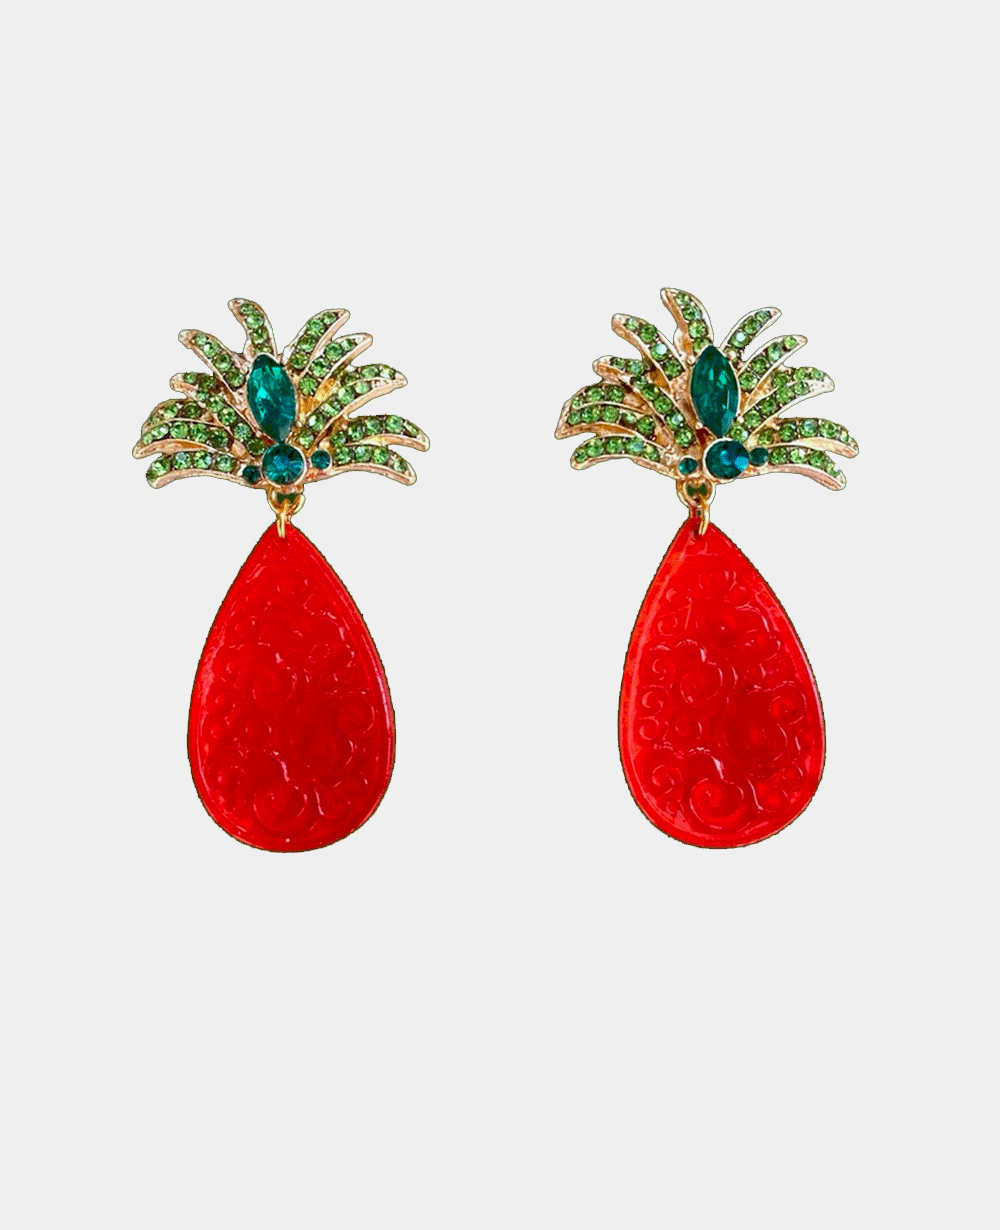 EARRINGS "DONNA SOL" RED/GREEN